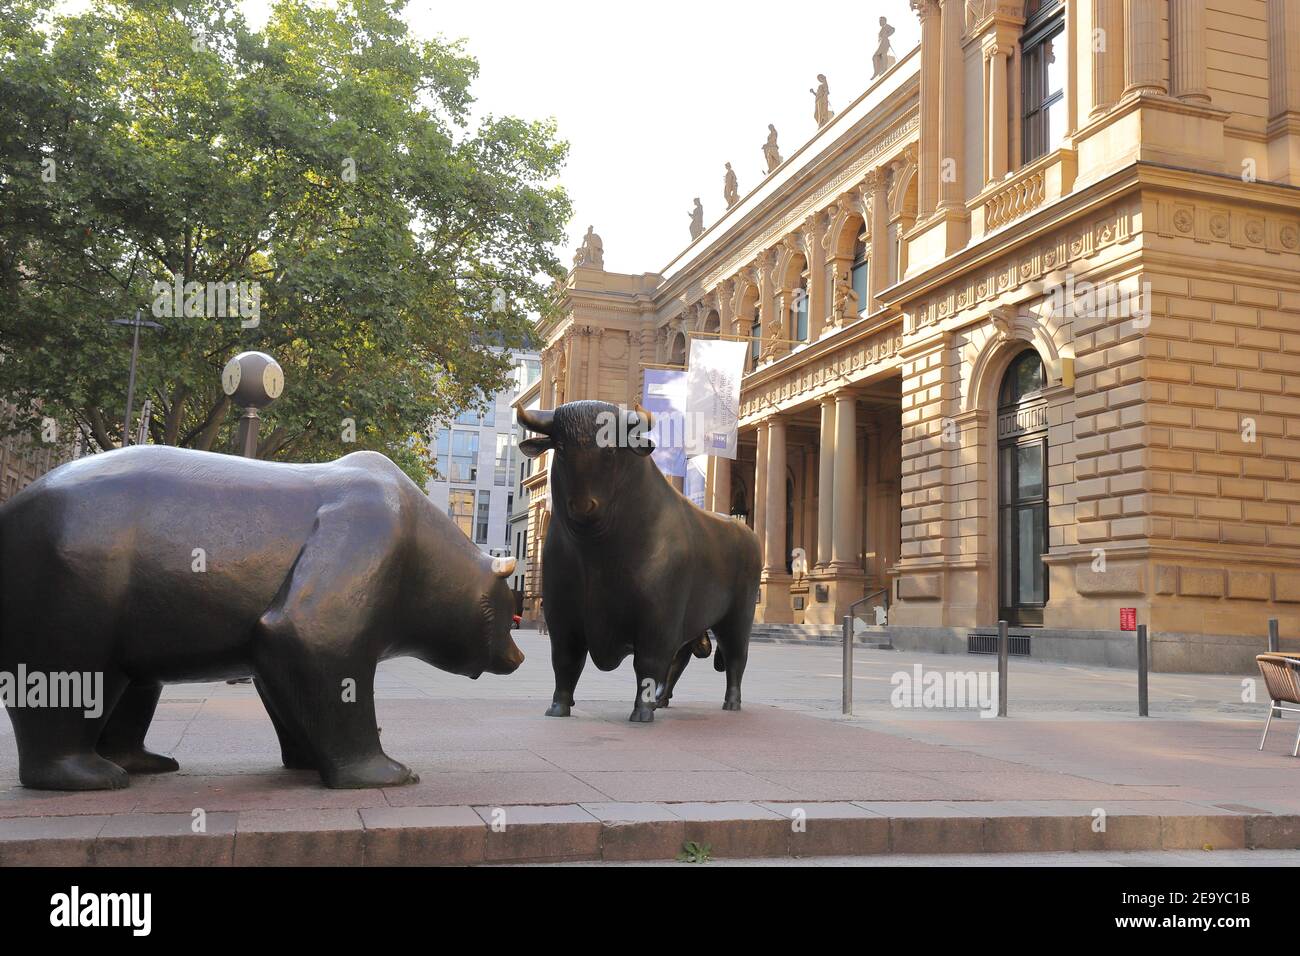 GERMANY, FRANKFURT AM MAIN - AUGUST 31, 2019: Bull and Bear statue in front of the Frankfurt Stock Exchange Stock Photo